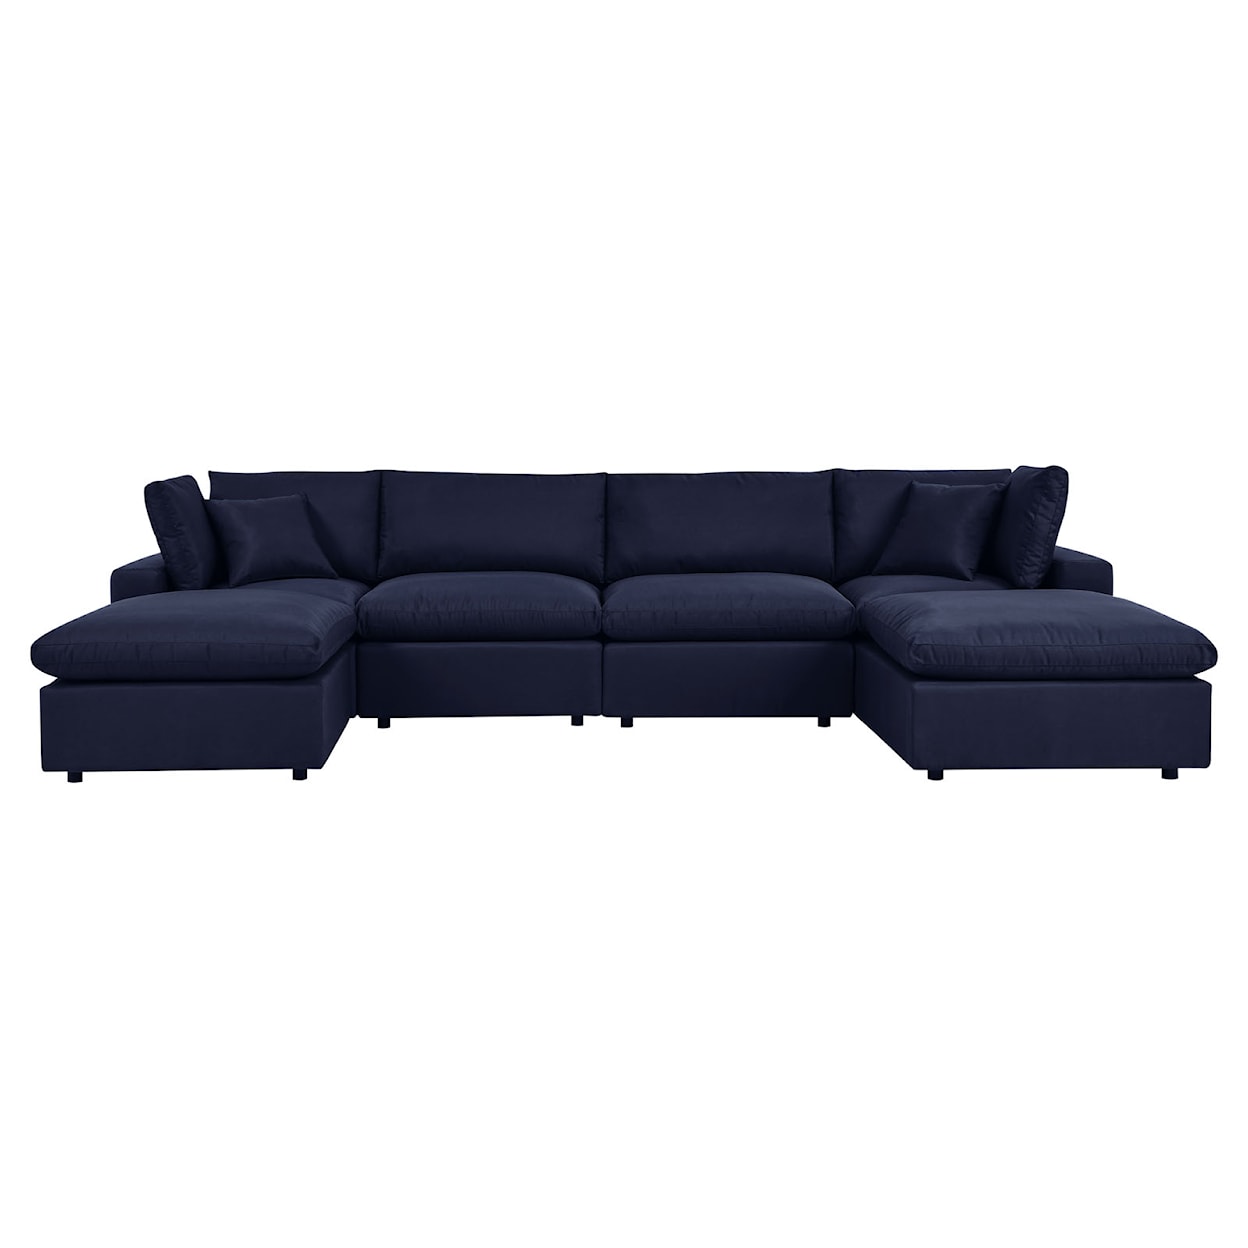 Modway Commix Outdoor 6-Piece Sectional Sofa